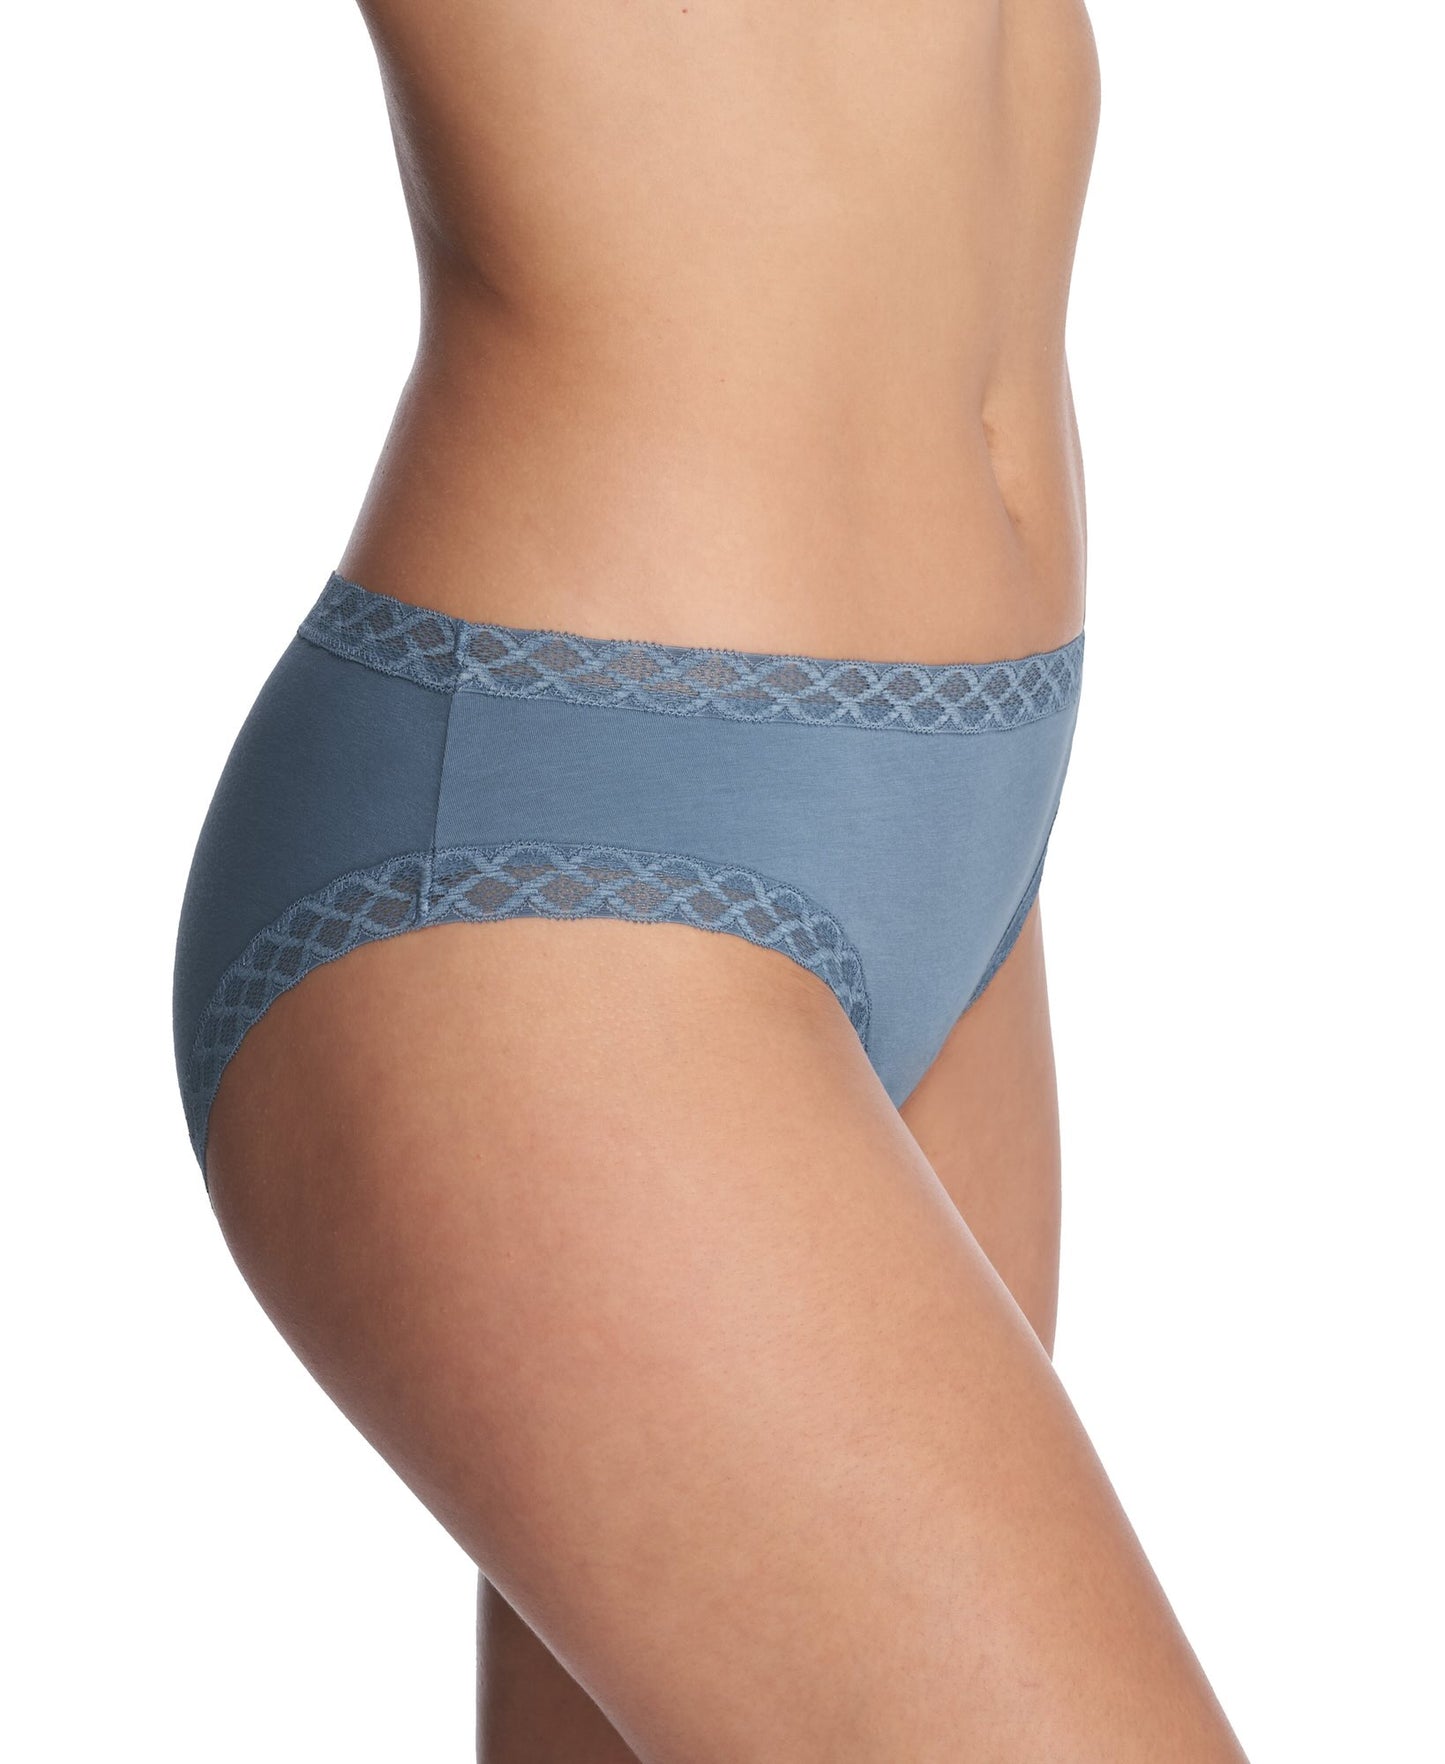 Bliss Girl brief - new late spring colors